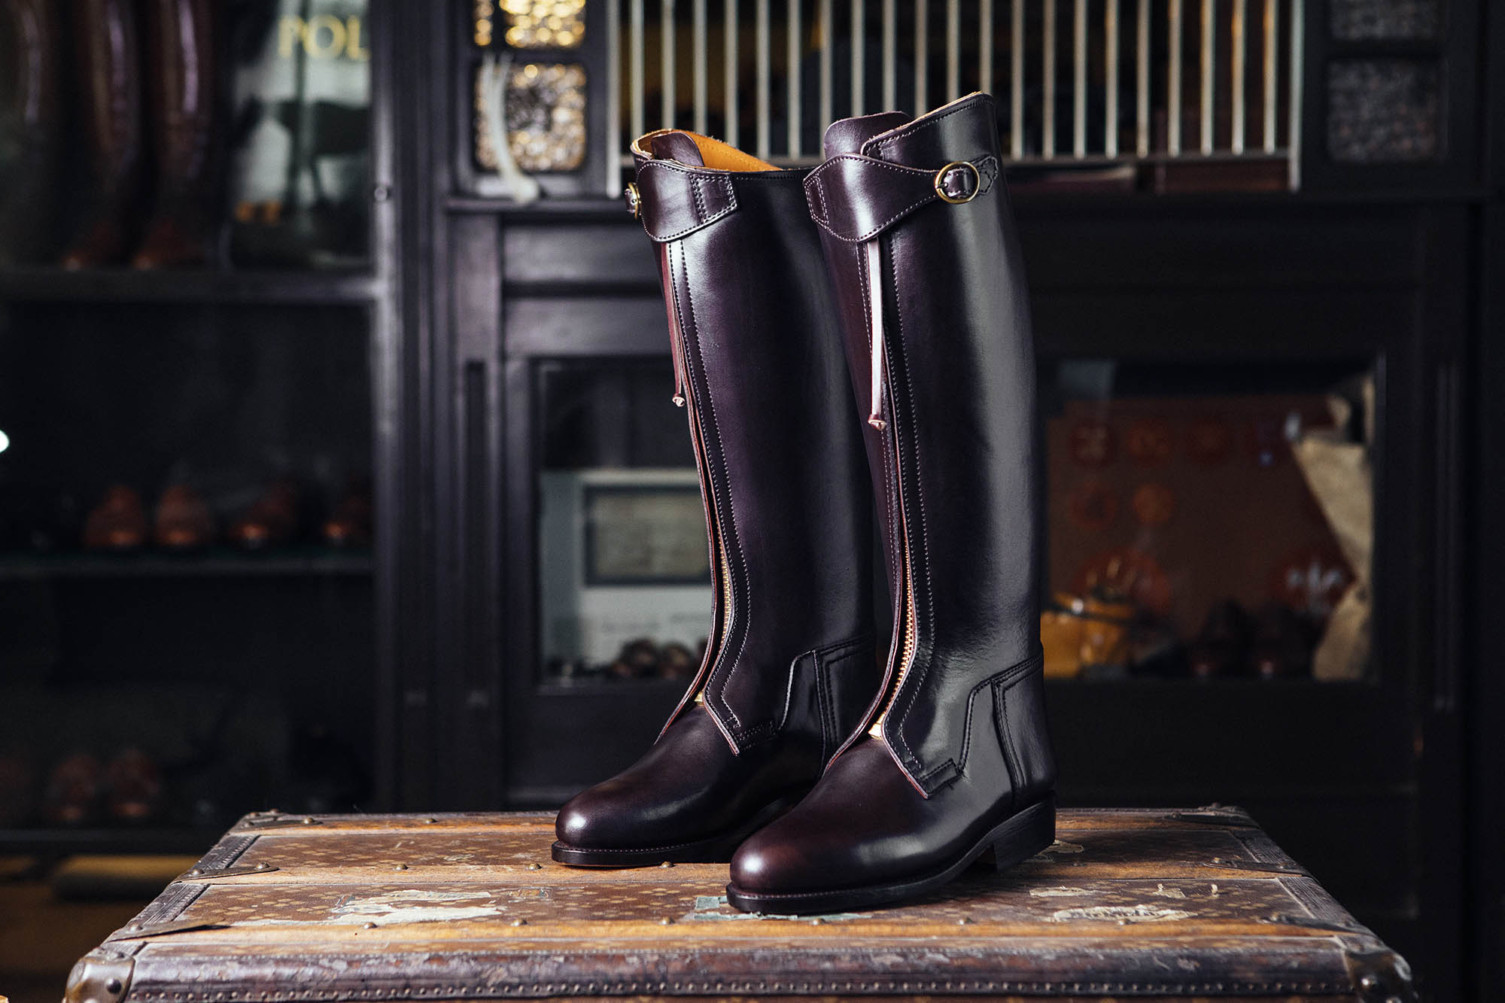 Buy > polo riding boots womens > in stock